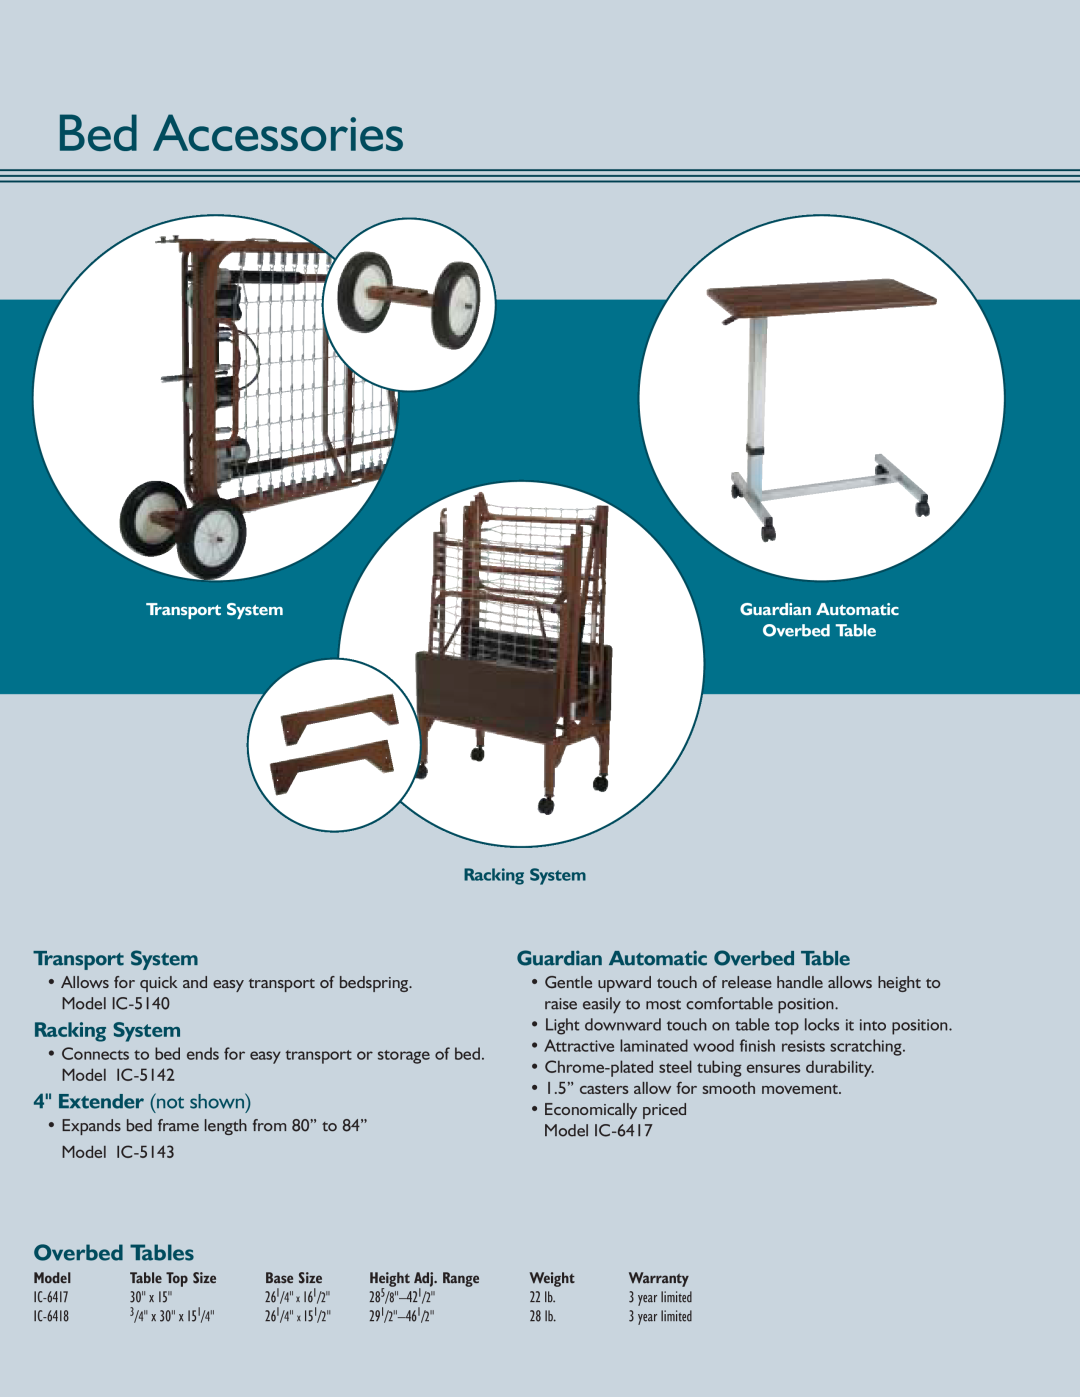 Sunrise Medical IC Series manual Bed Accessories, Overbed Tables, Transport System, Racking System, Extender not shown 